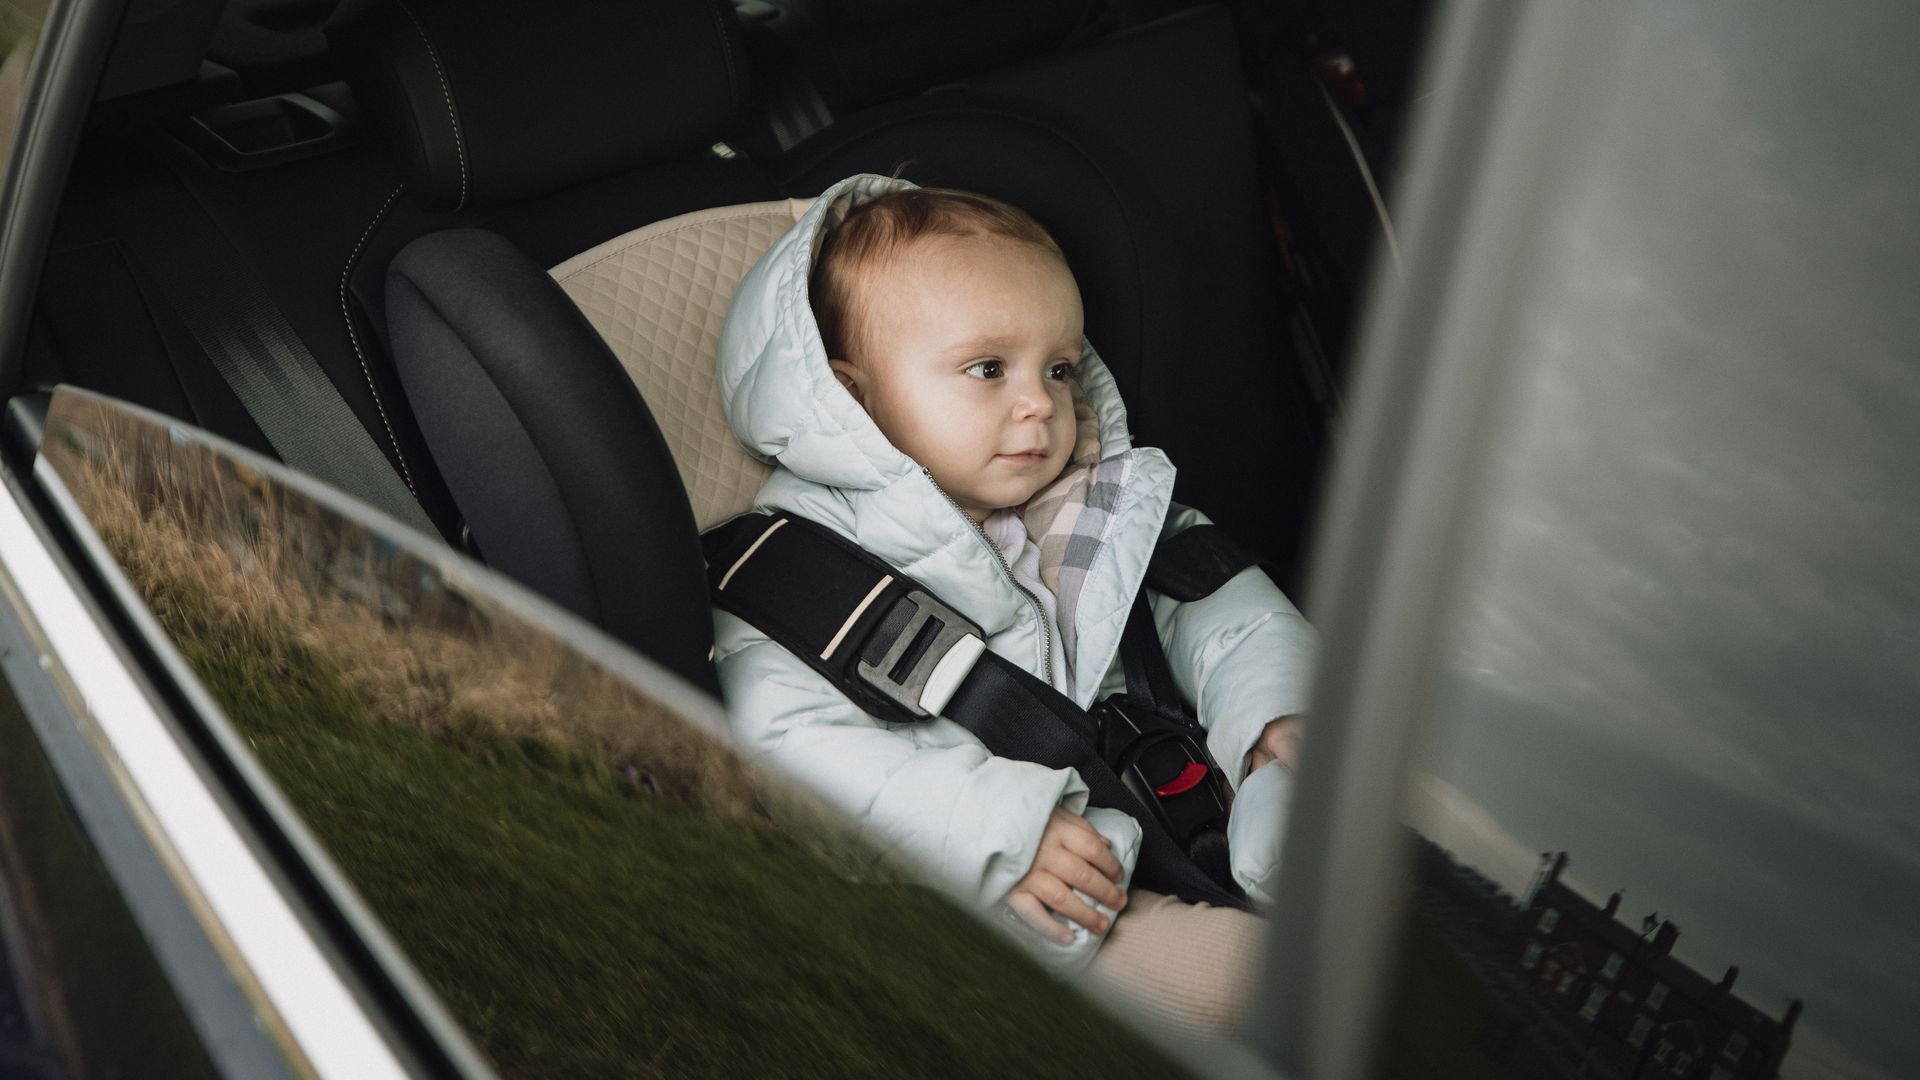 Image of a baby in a car seat in a vehicle. 